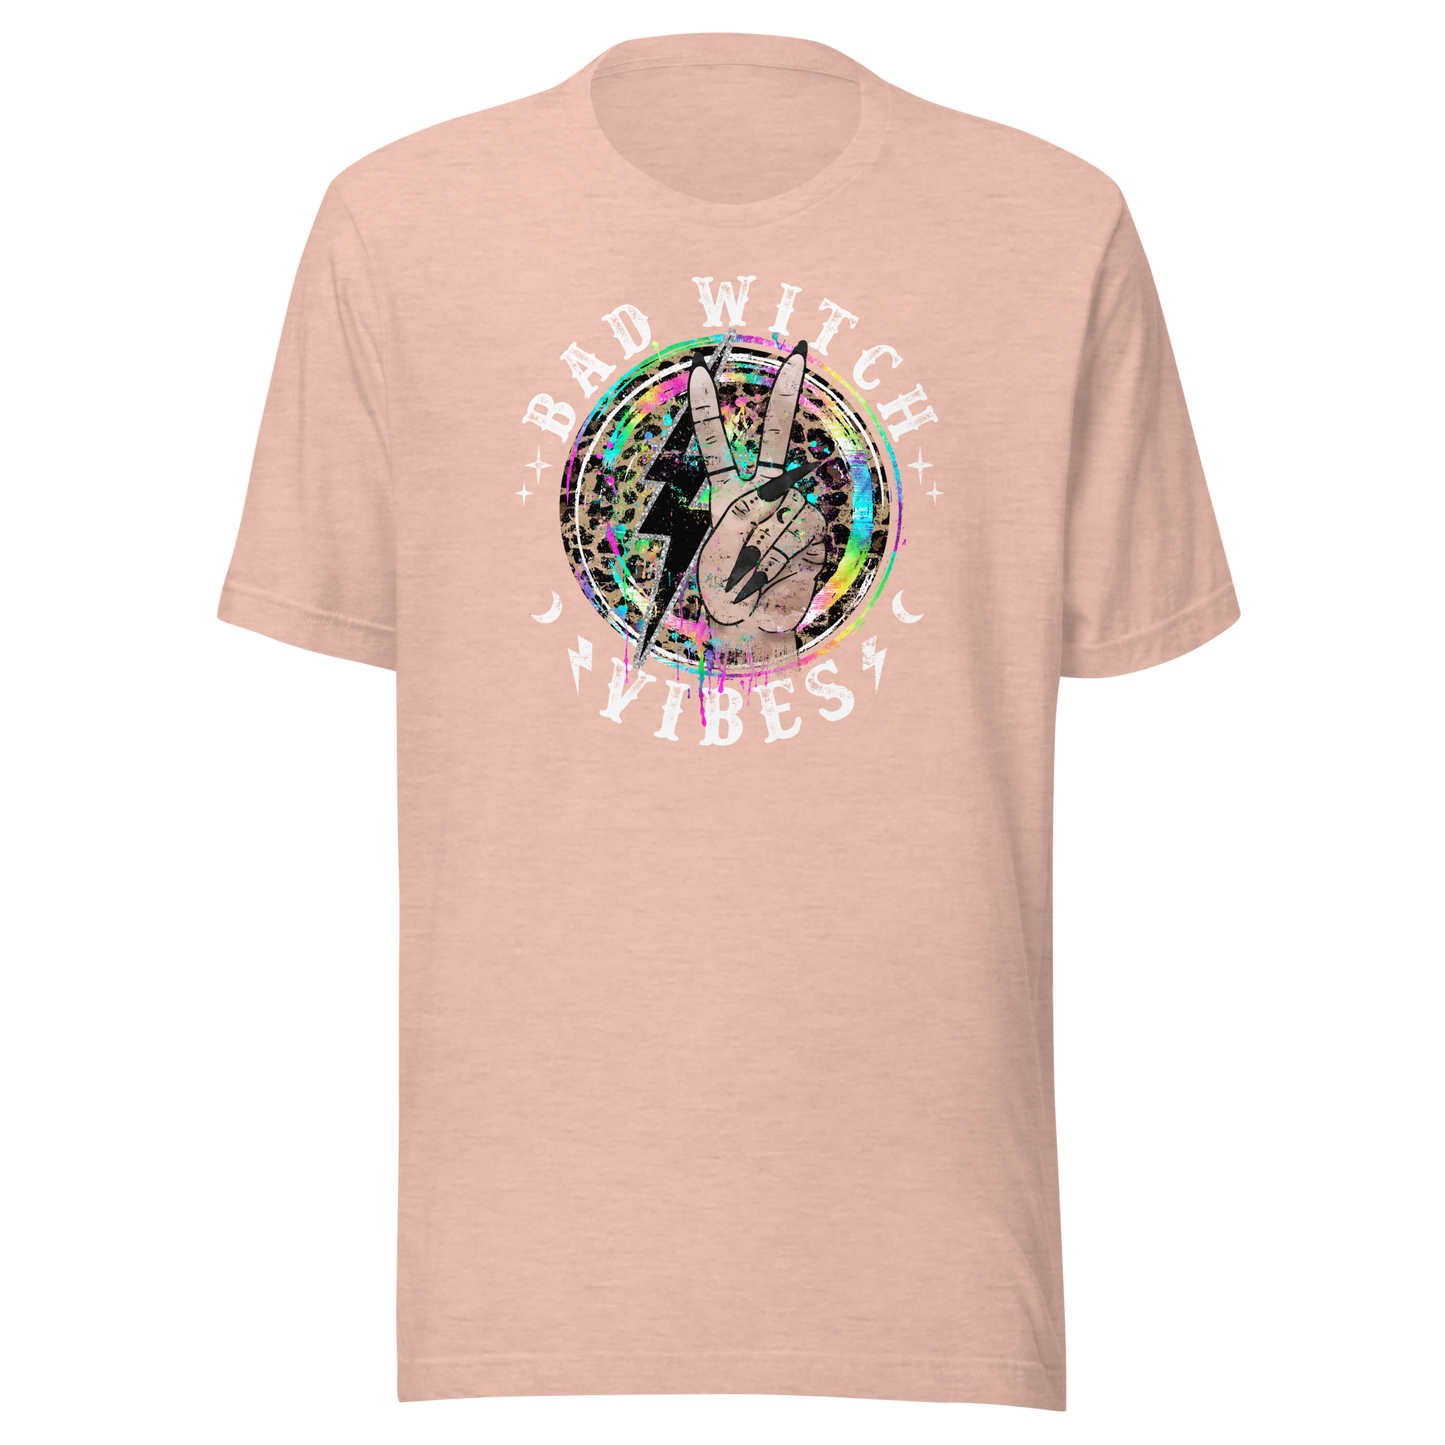 Bad Witch Vibes T-Shirt